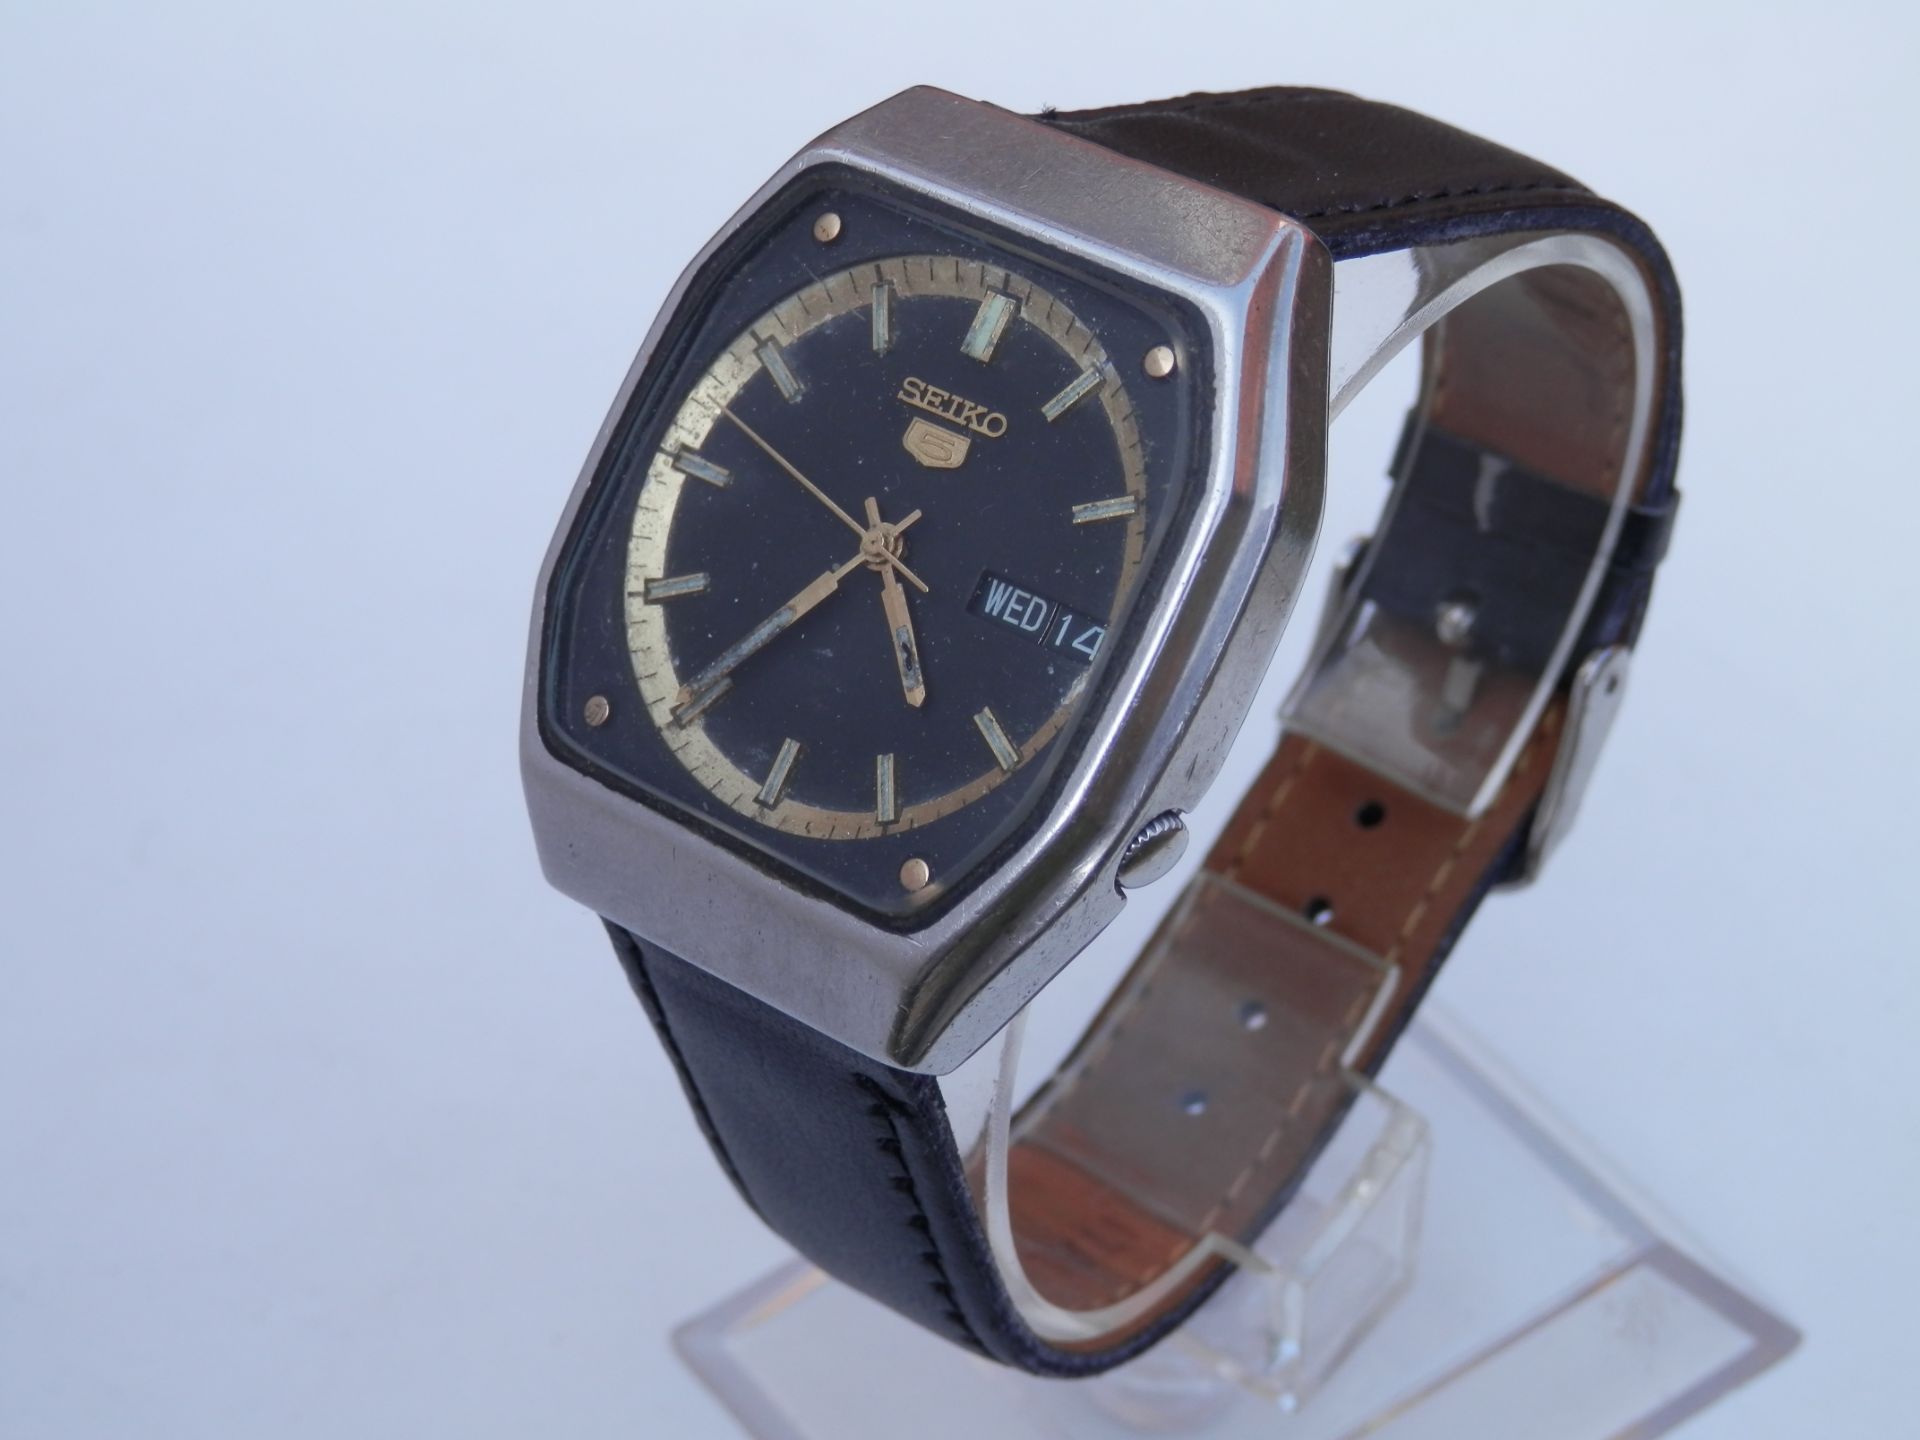 1981 SEIKO 5 AUTOMATIC DAY & DATE JEWELLED WATCH, BLACK & GOLD DIAL, RARE WORKING WATCH